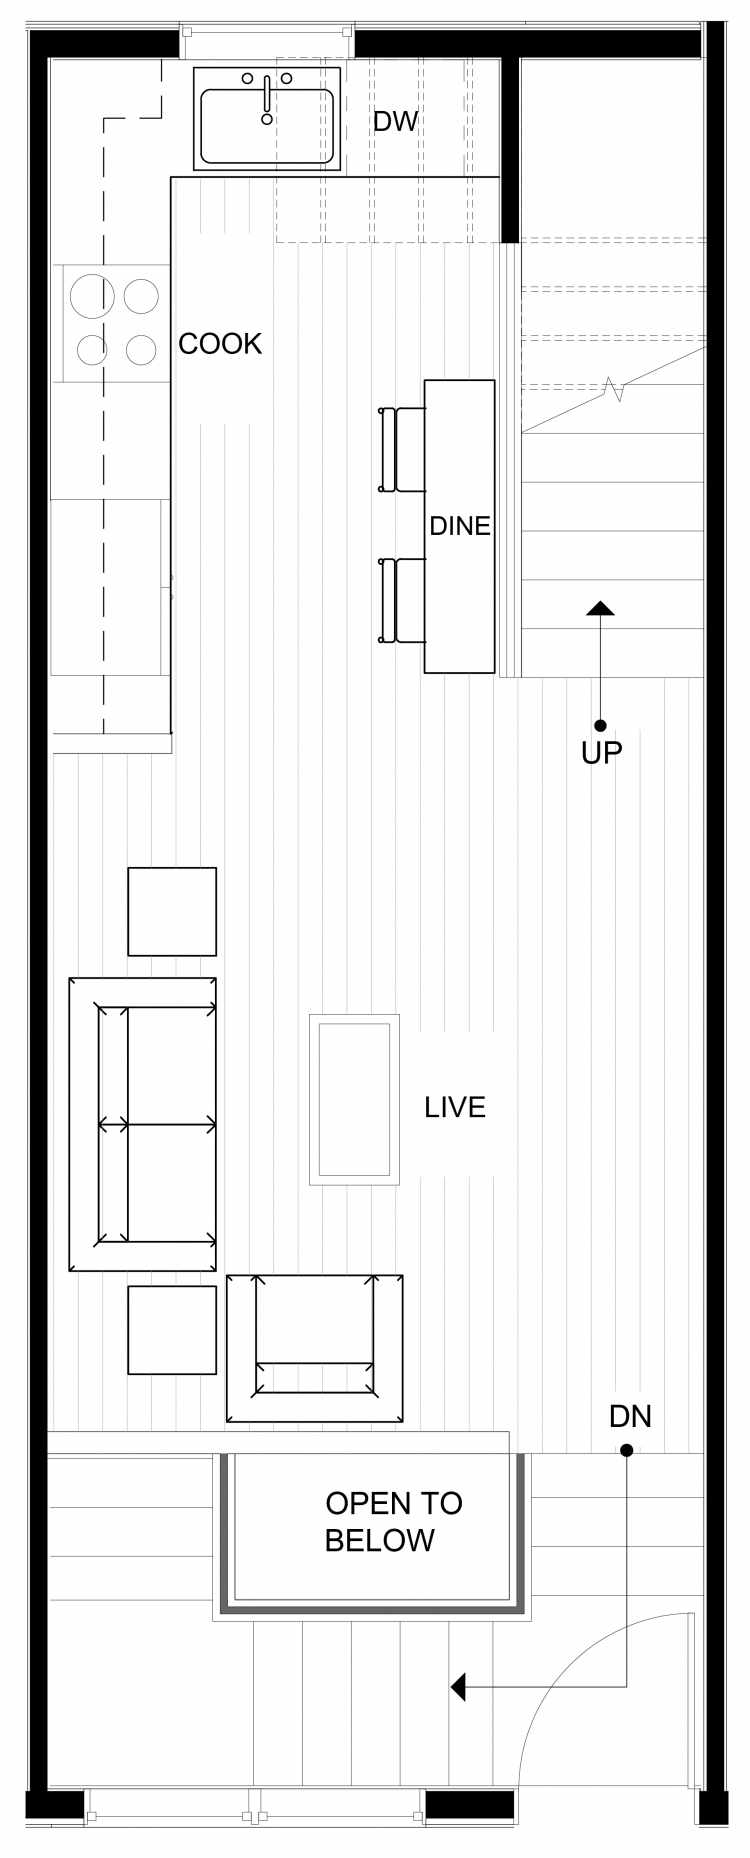 Second Floor Plan of 1542 15th Ave E, One of the Grandview Townhomes in Capitol Hill